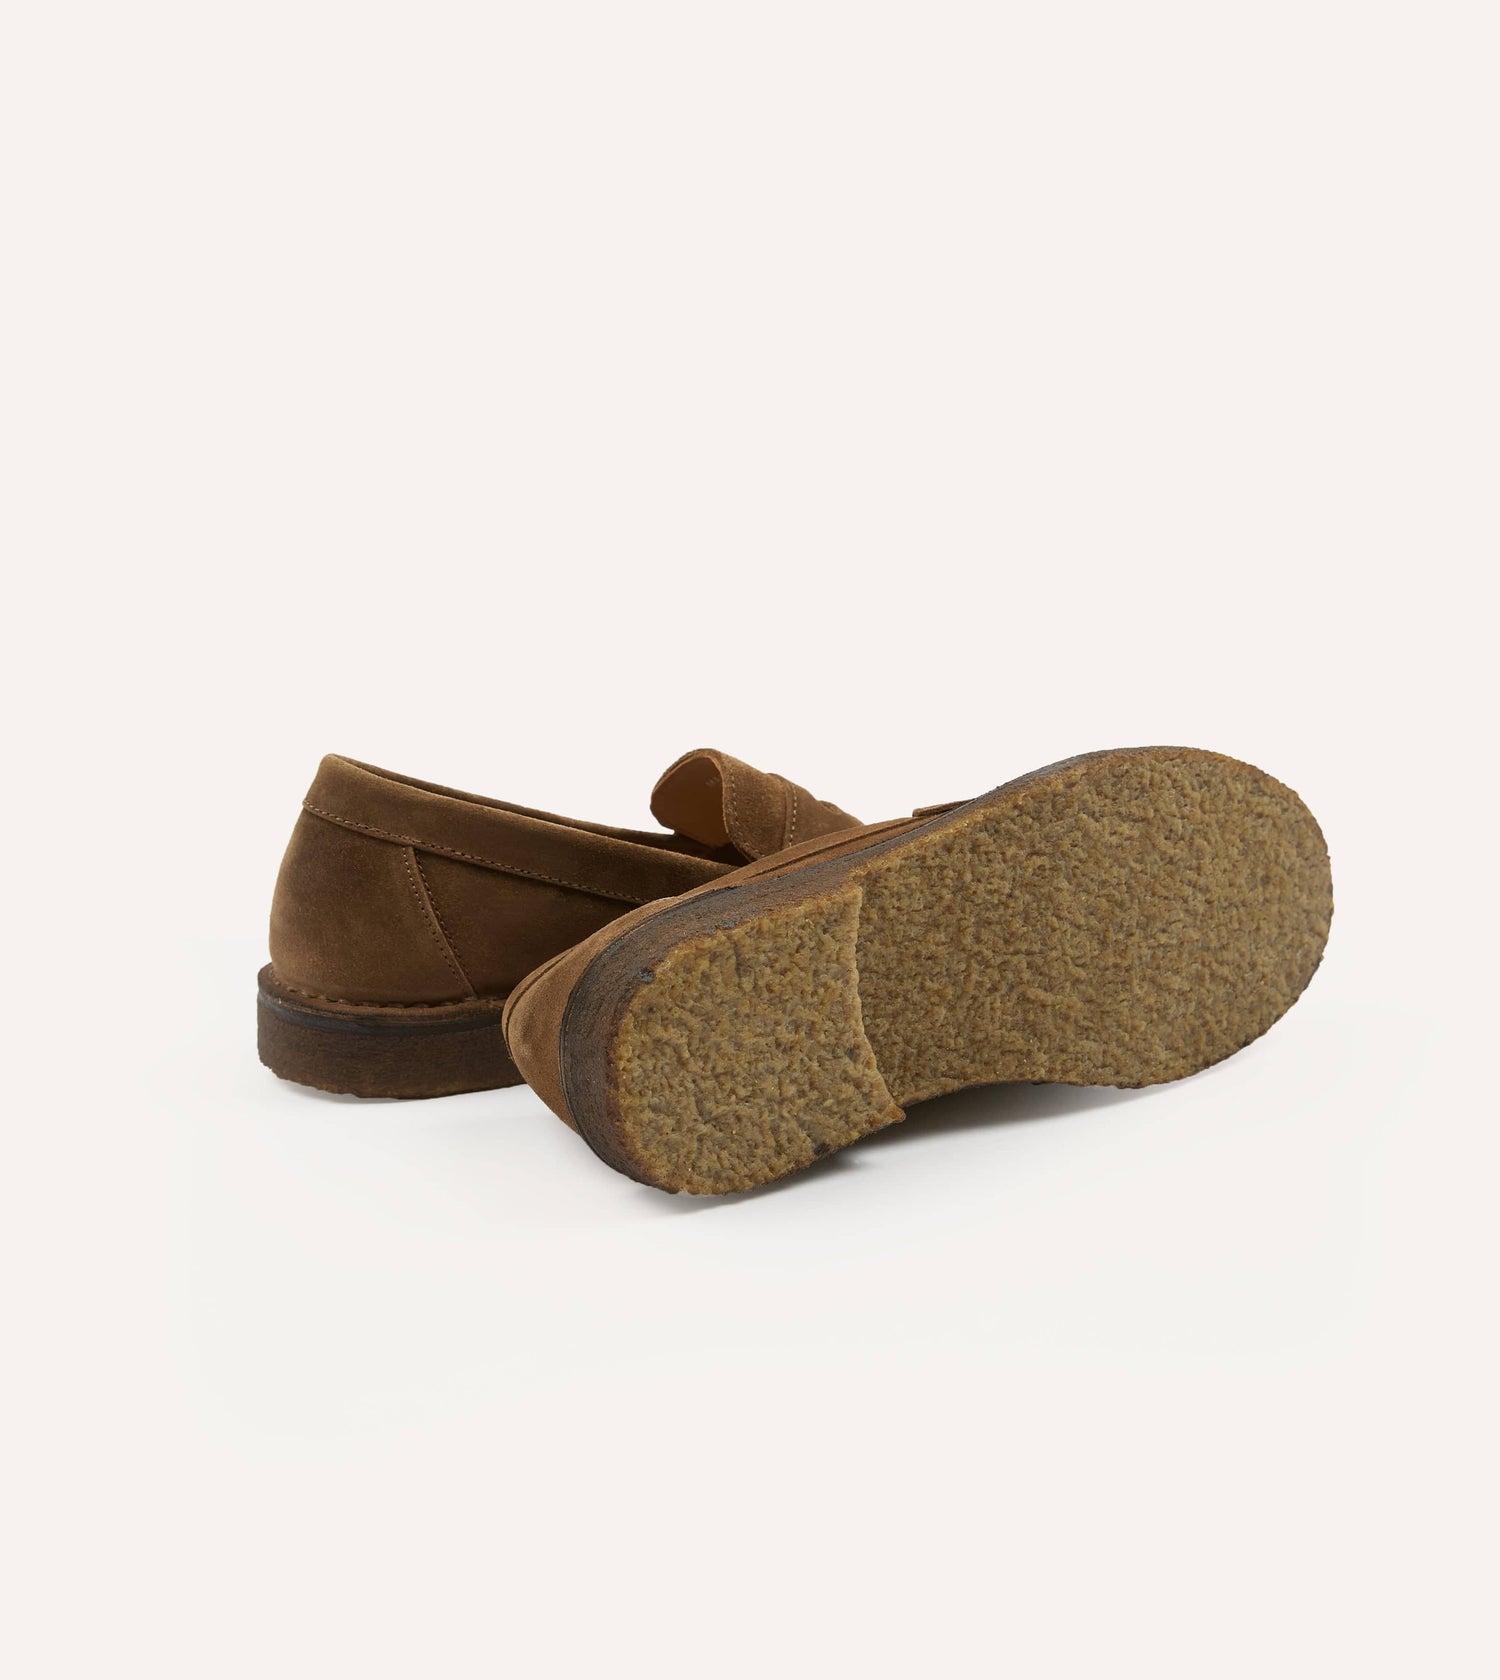 Tobacco Suede Canal Penny Loafer with Crepe Sole